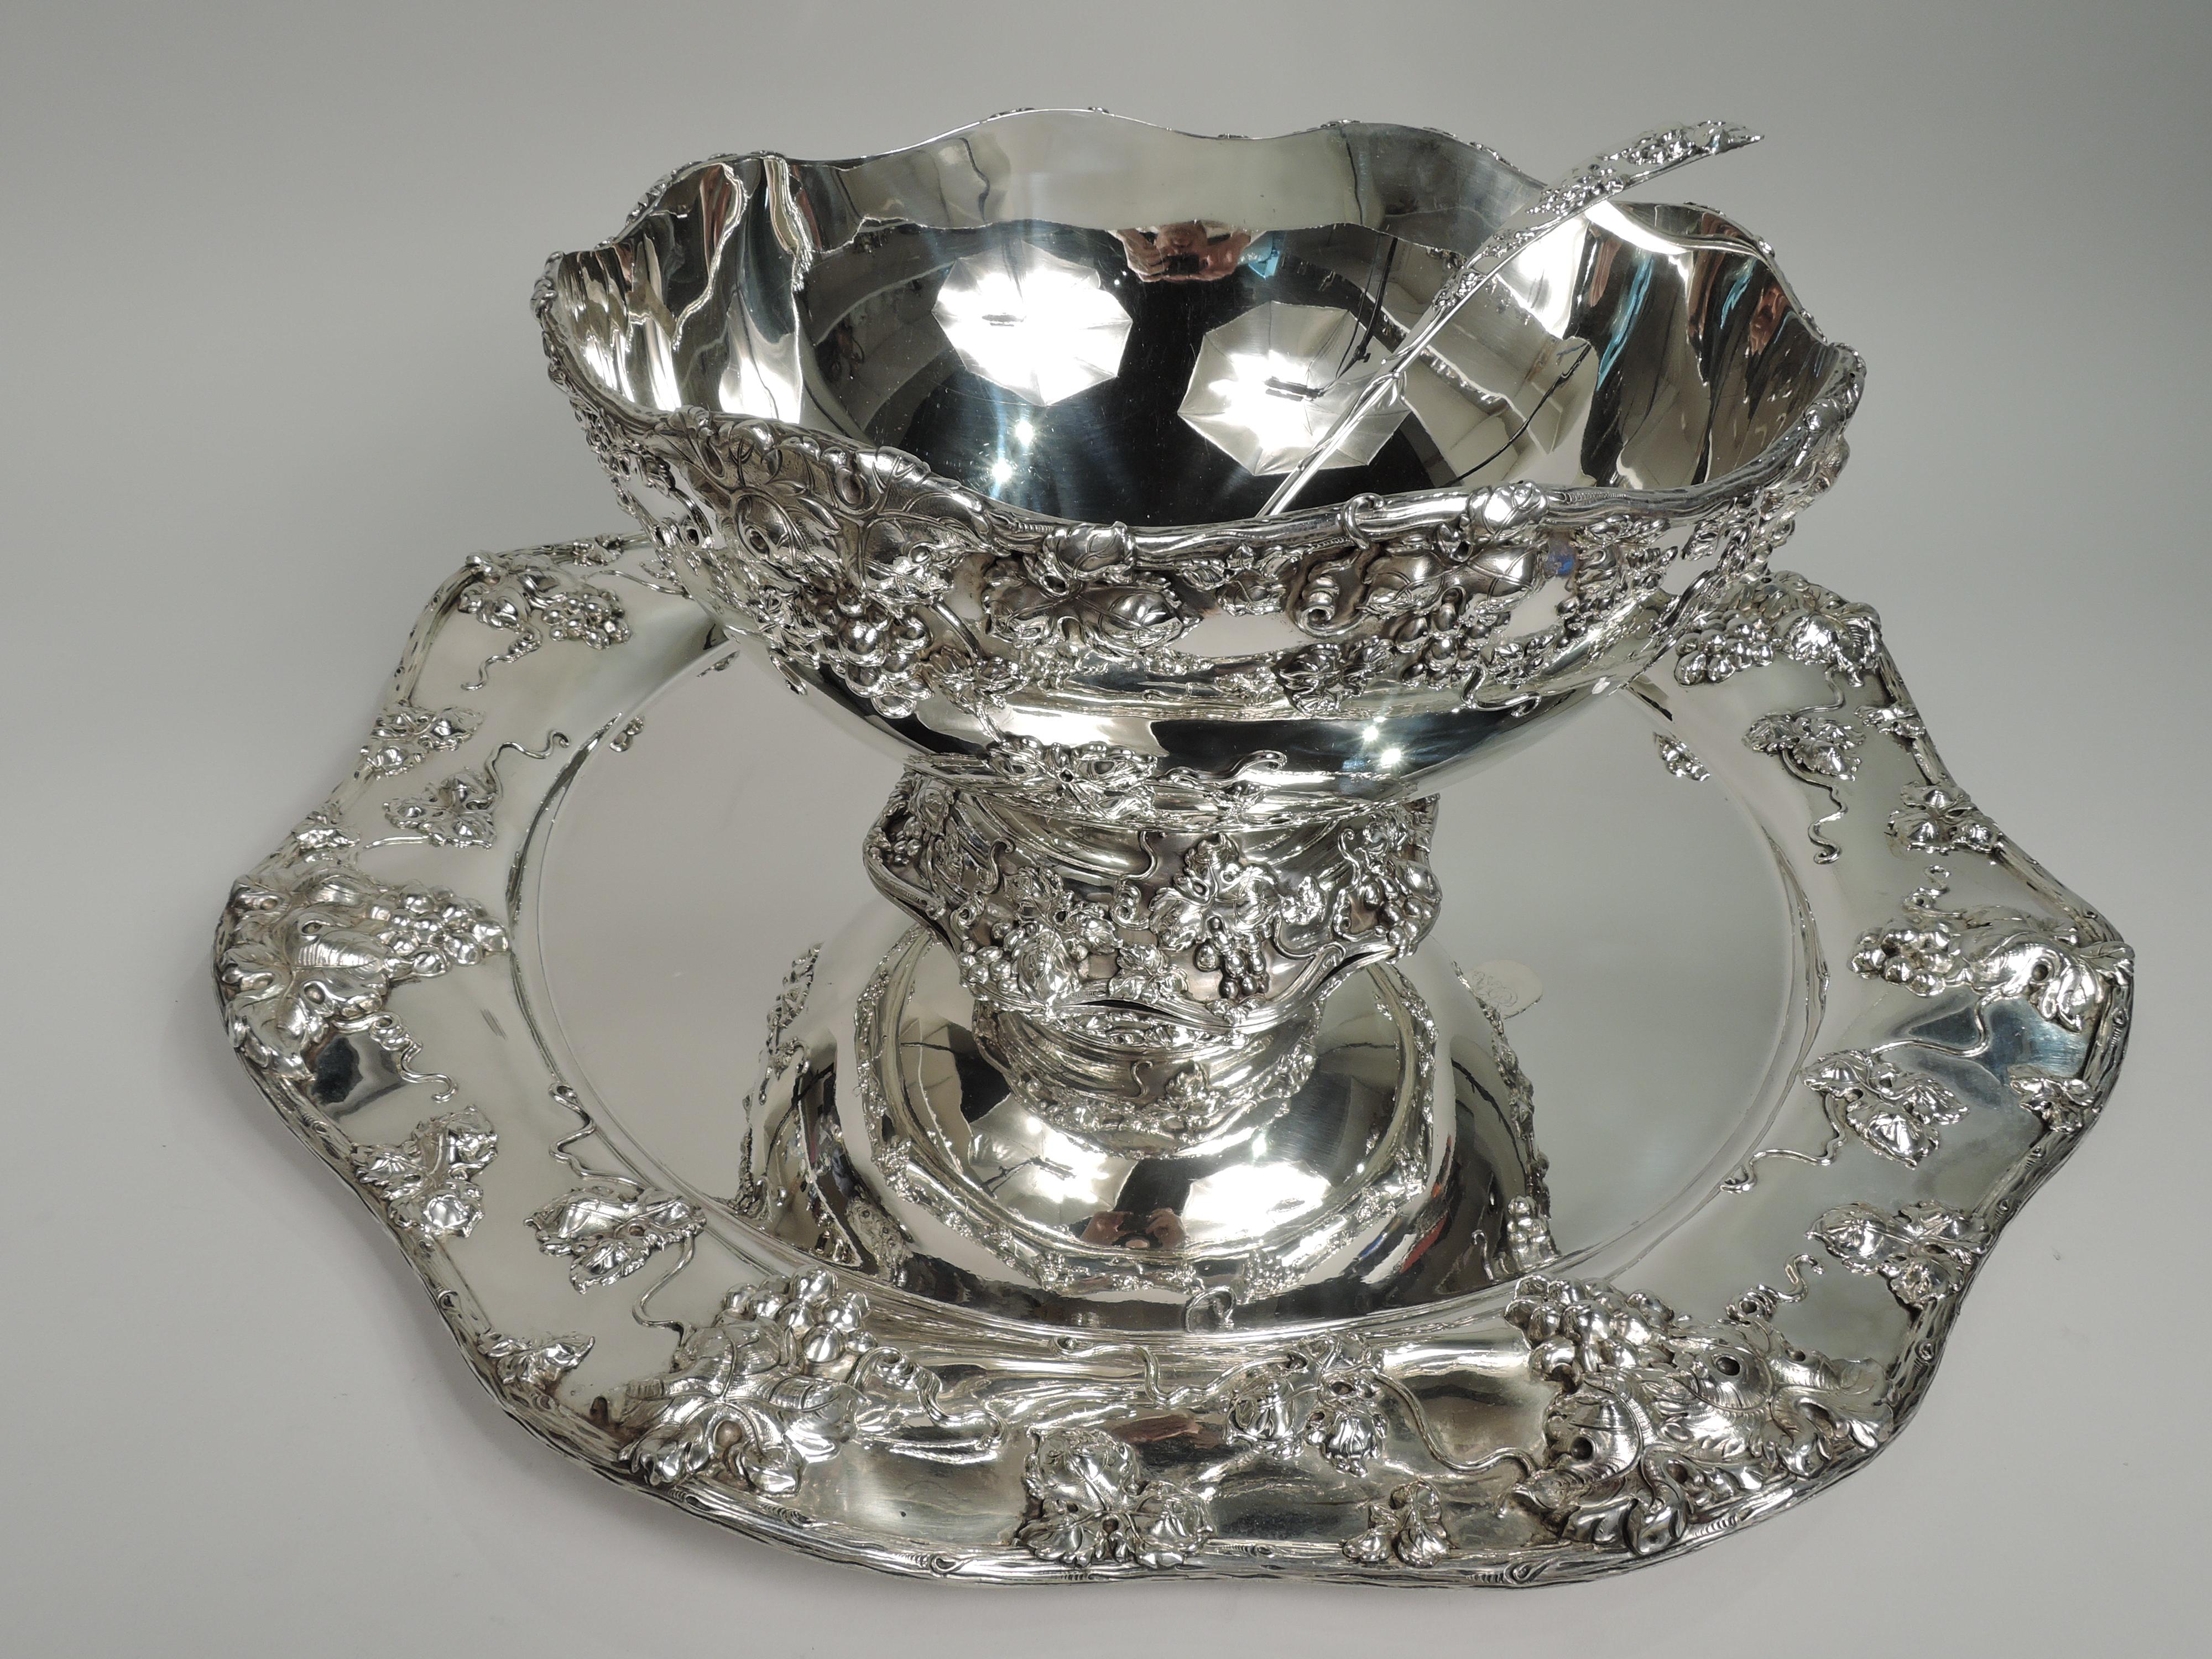 Gorgeous turn-of-the-century Gilded Age sterling silver punch bowl and ladle on stand. Made by Frank W. Smith in Gardner, Mass. Curved bowl in domed foot. Stand has plain well and wide shoulder. Applied grape bunches and leaves as well as squiggly